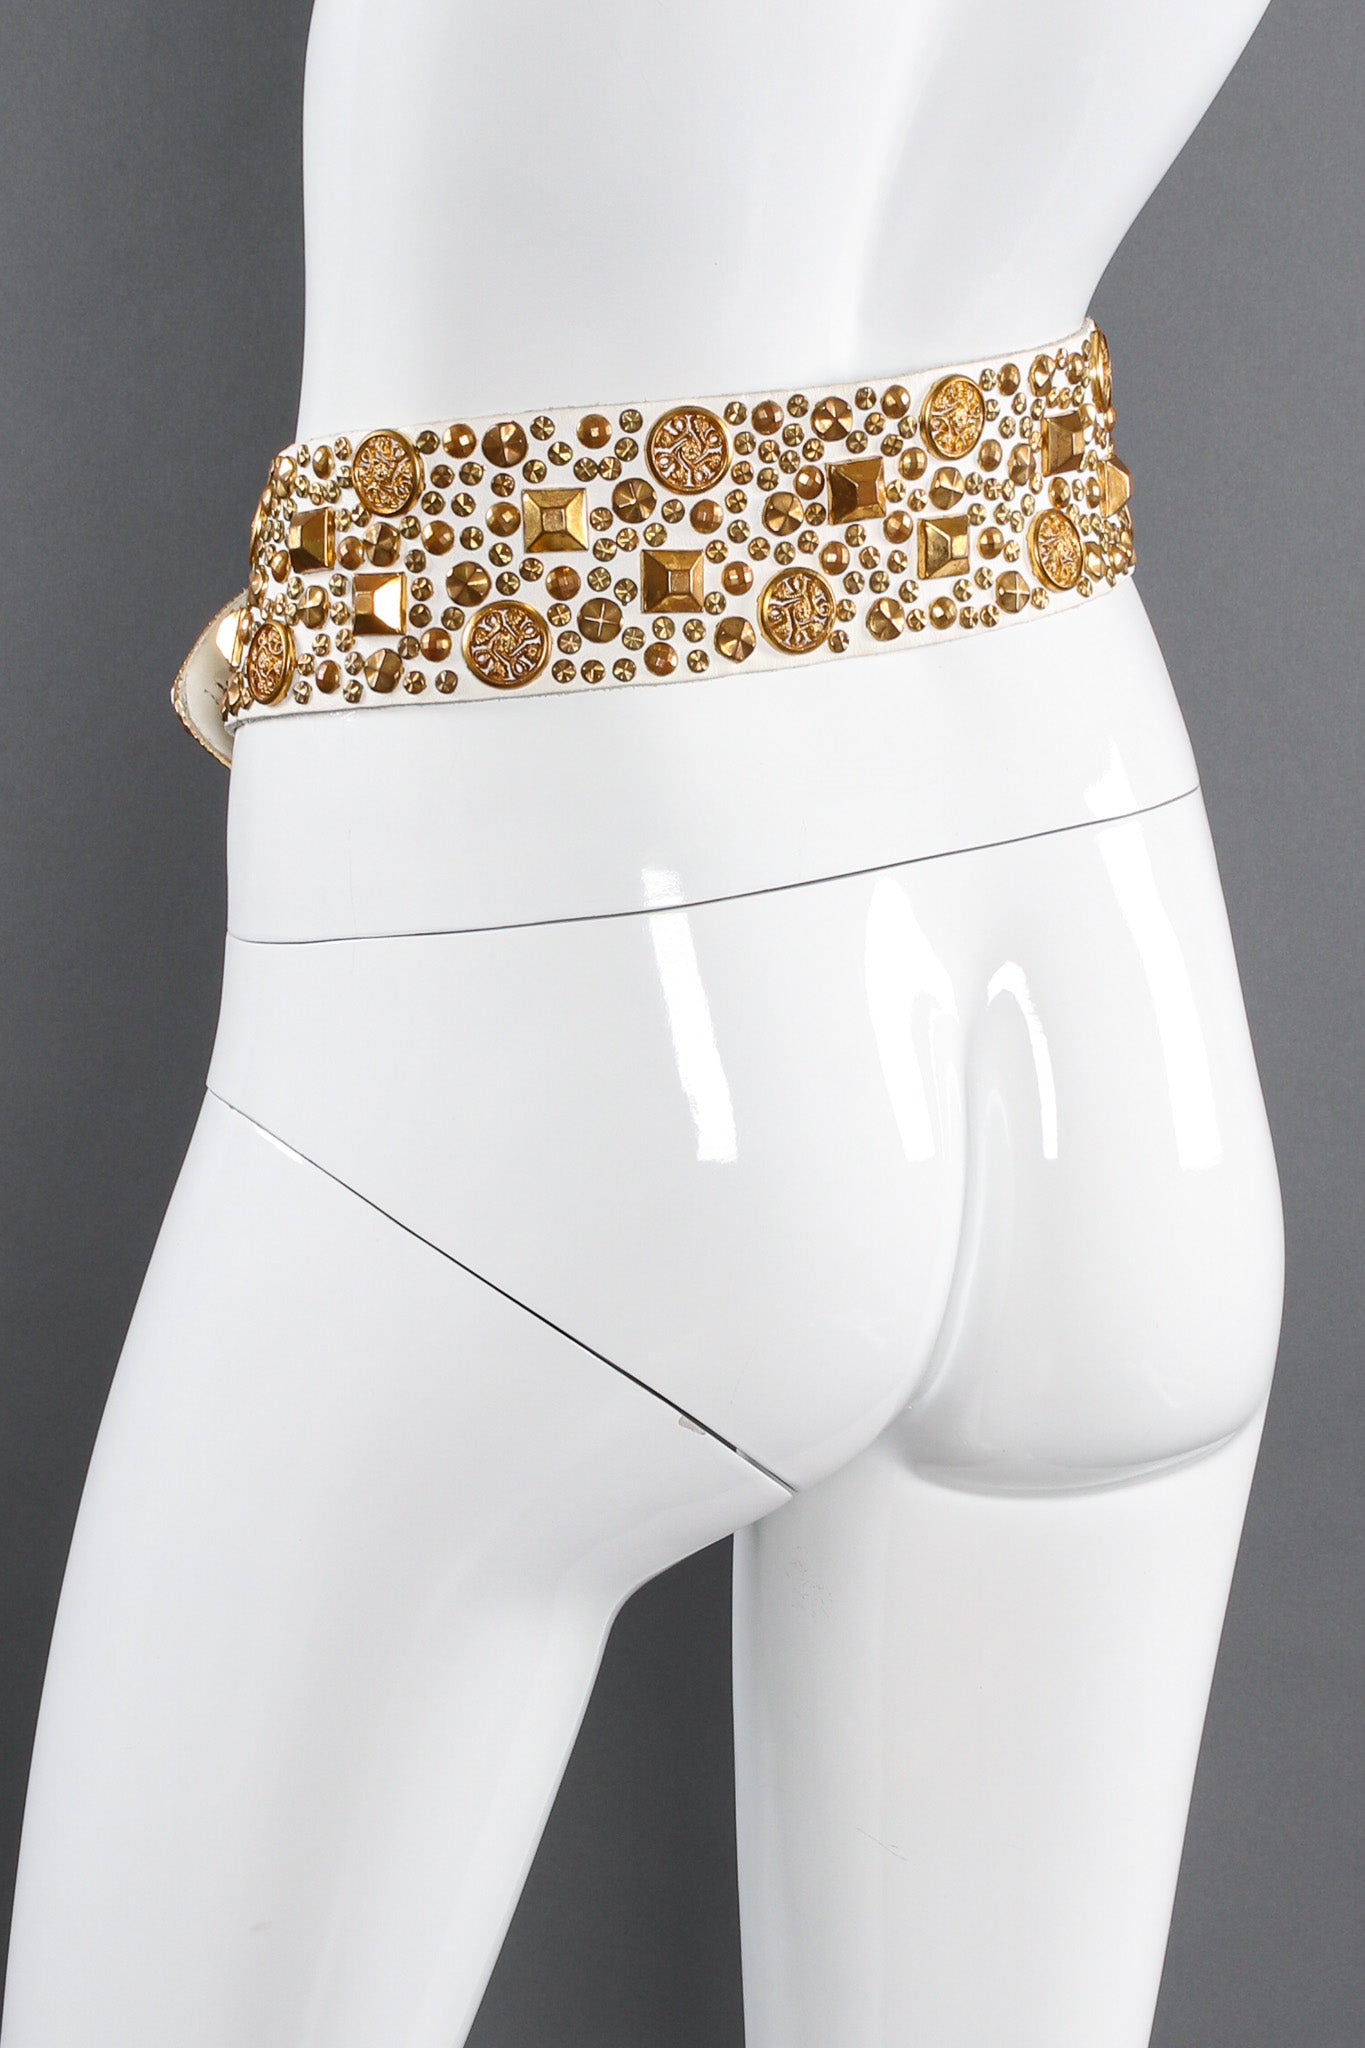 Studded leather belt with assorted gold studs by Michael Morrison mannequin back @recessla